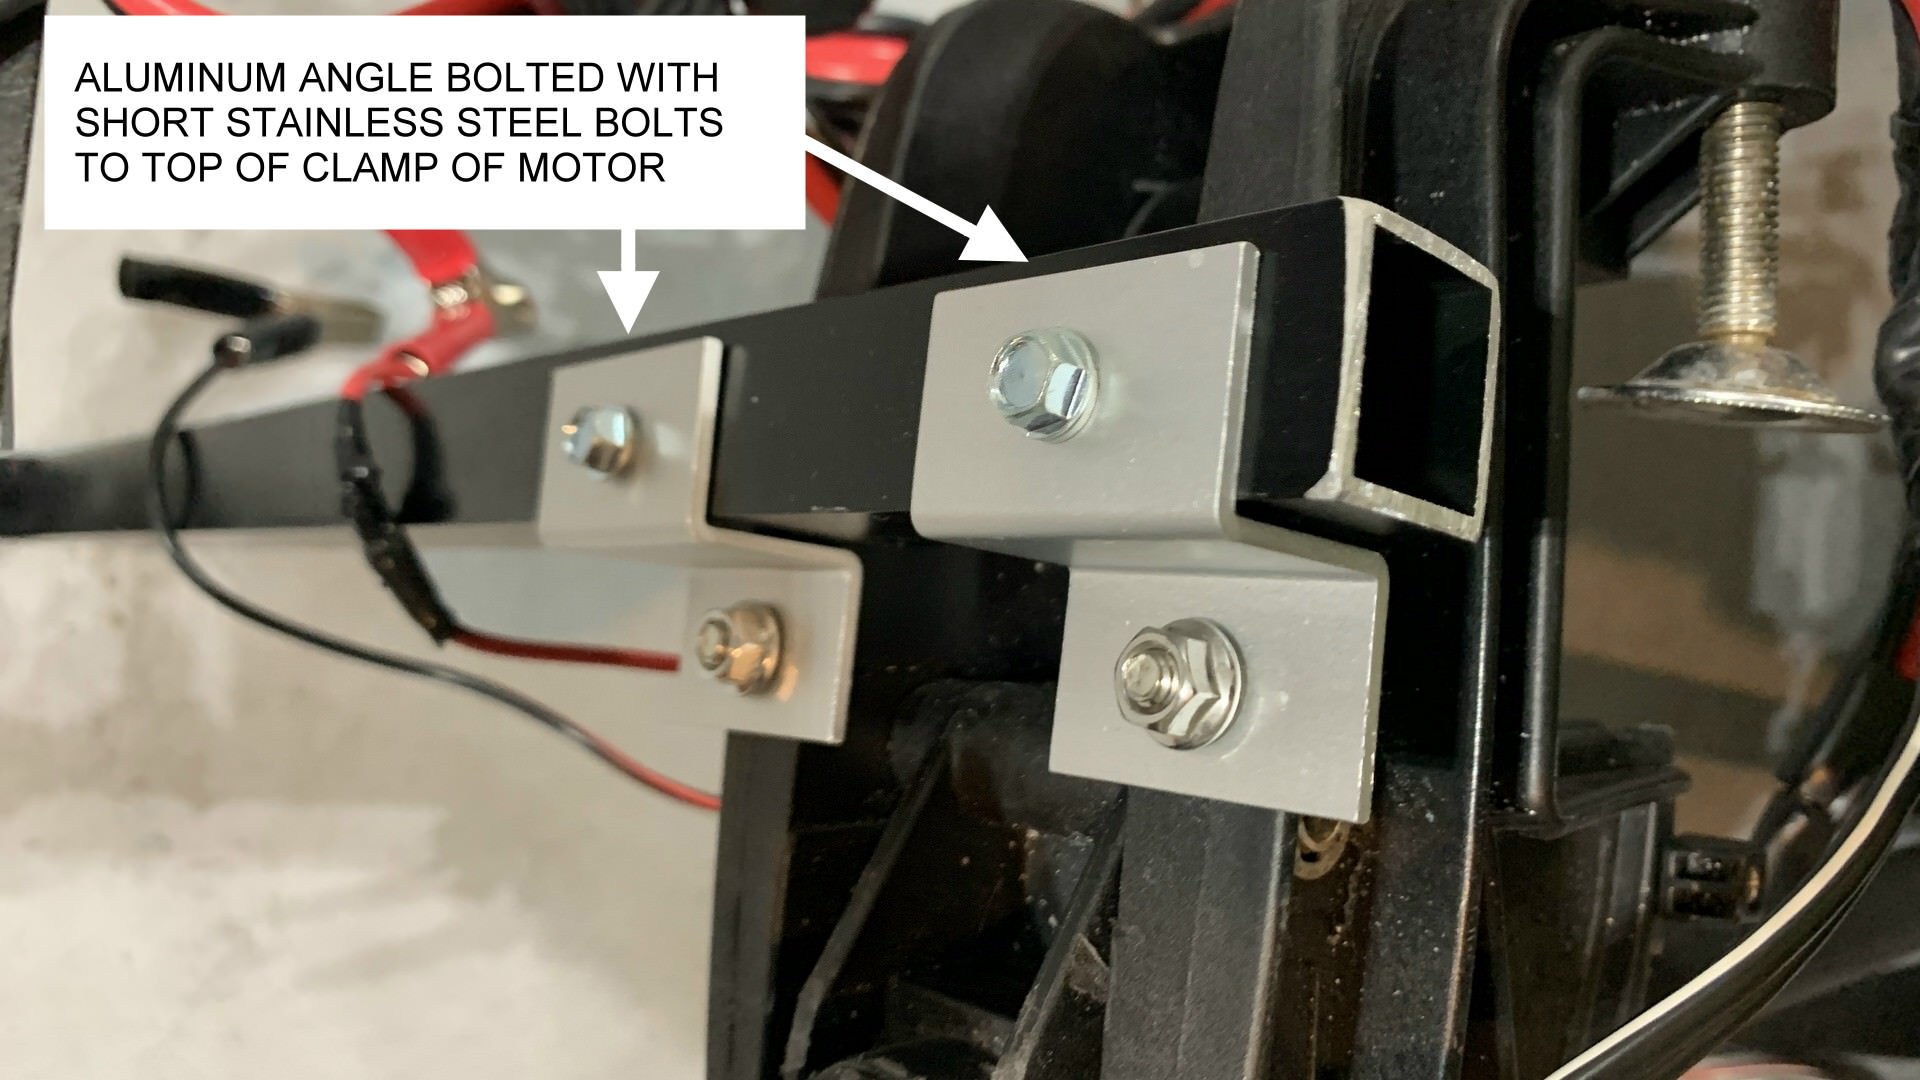 DIY instructions for remote steering for electric trolling motor using Linear Actuator.